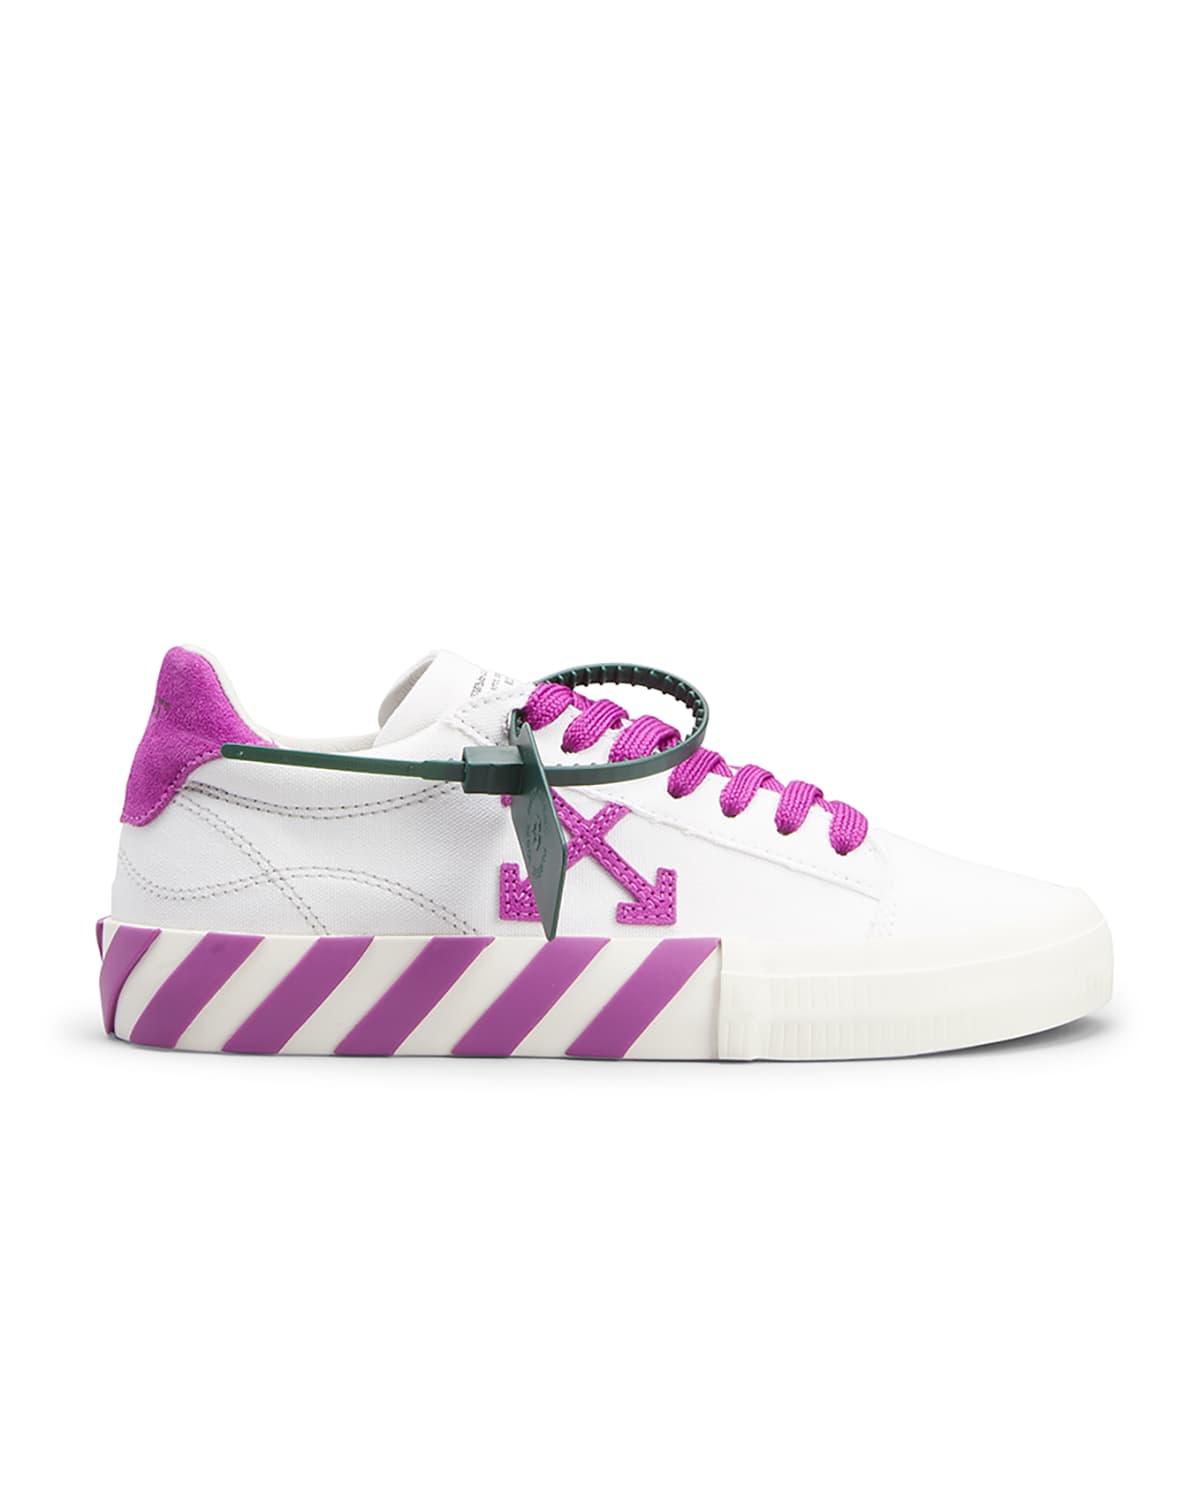 Off-White c/o Virgil Abloh Vulcanized Bicolor Low-top Sneakers in Pink |  Lyst